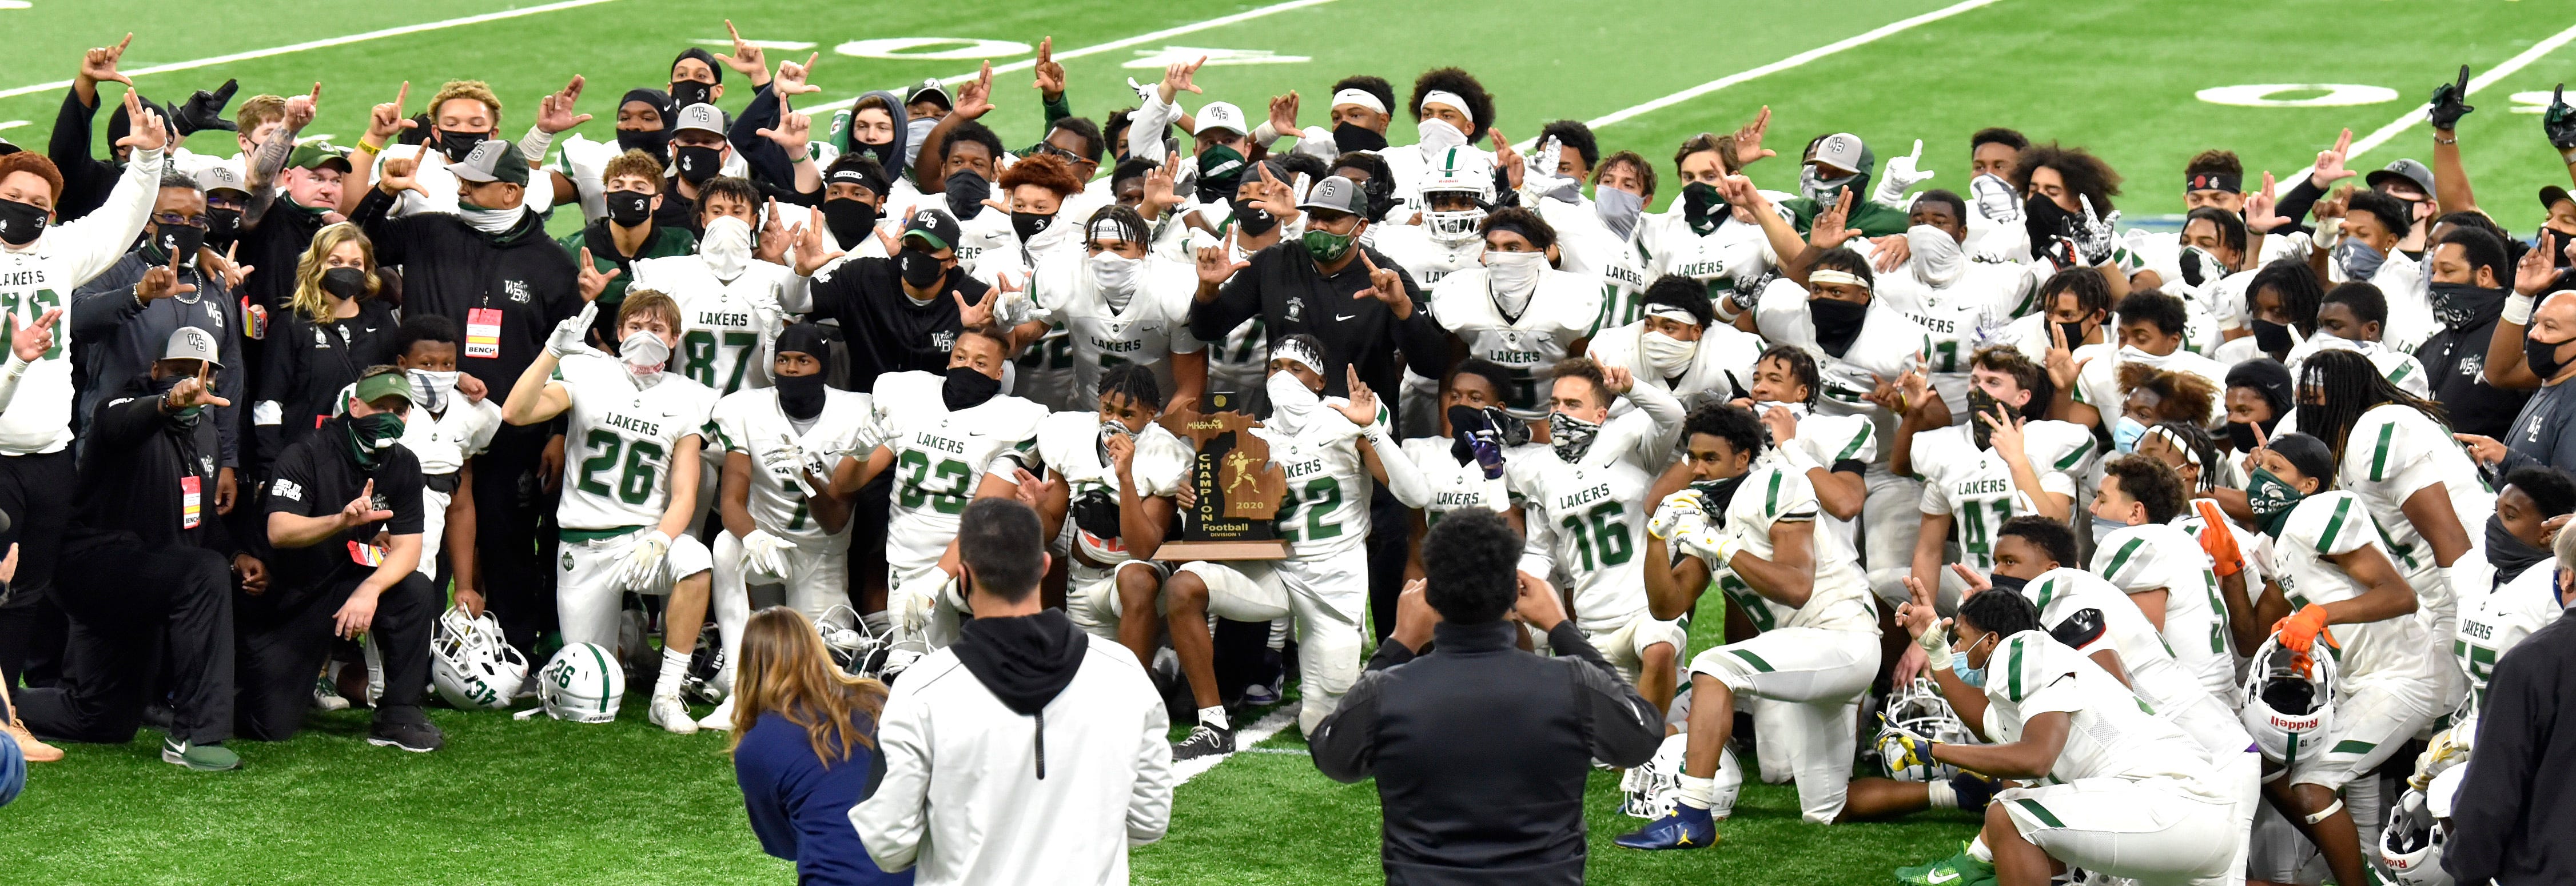 Members of the West Bloomfield football team pose for their championship group shot as they win the MHSAA Division 1 finals.